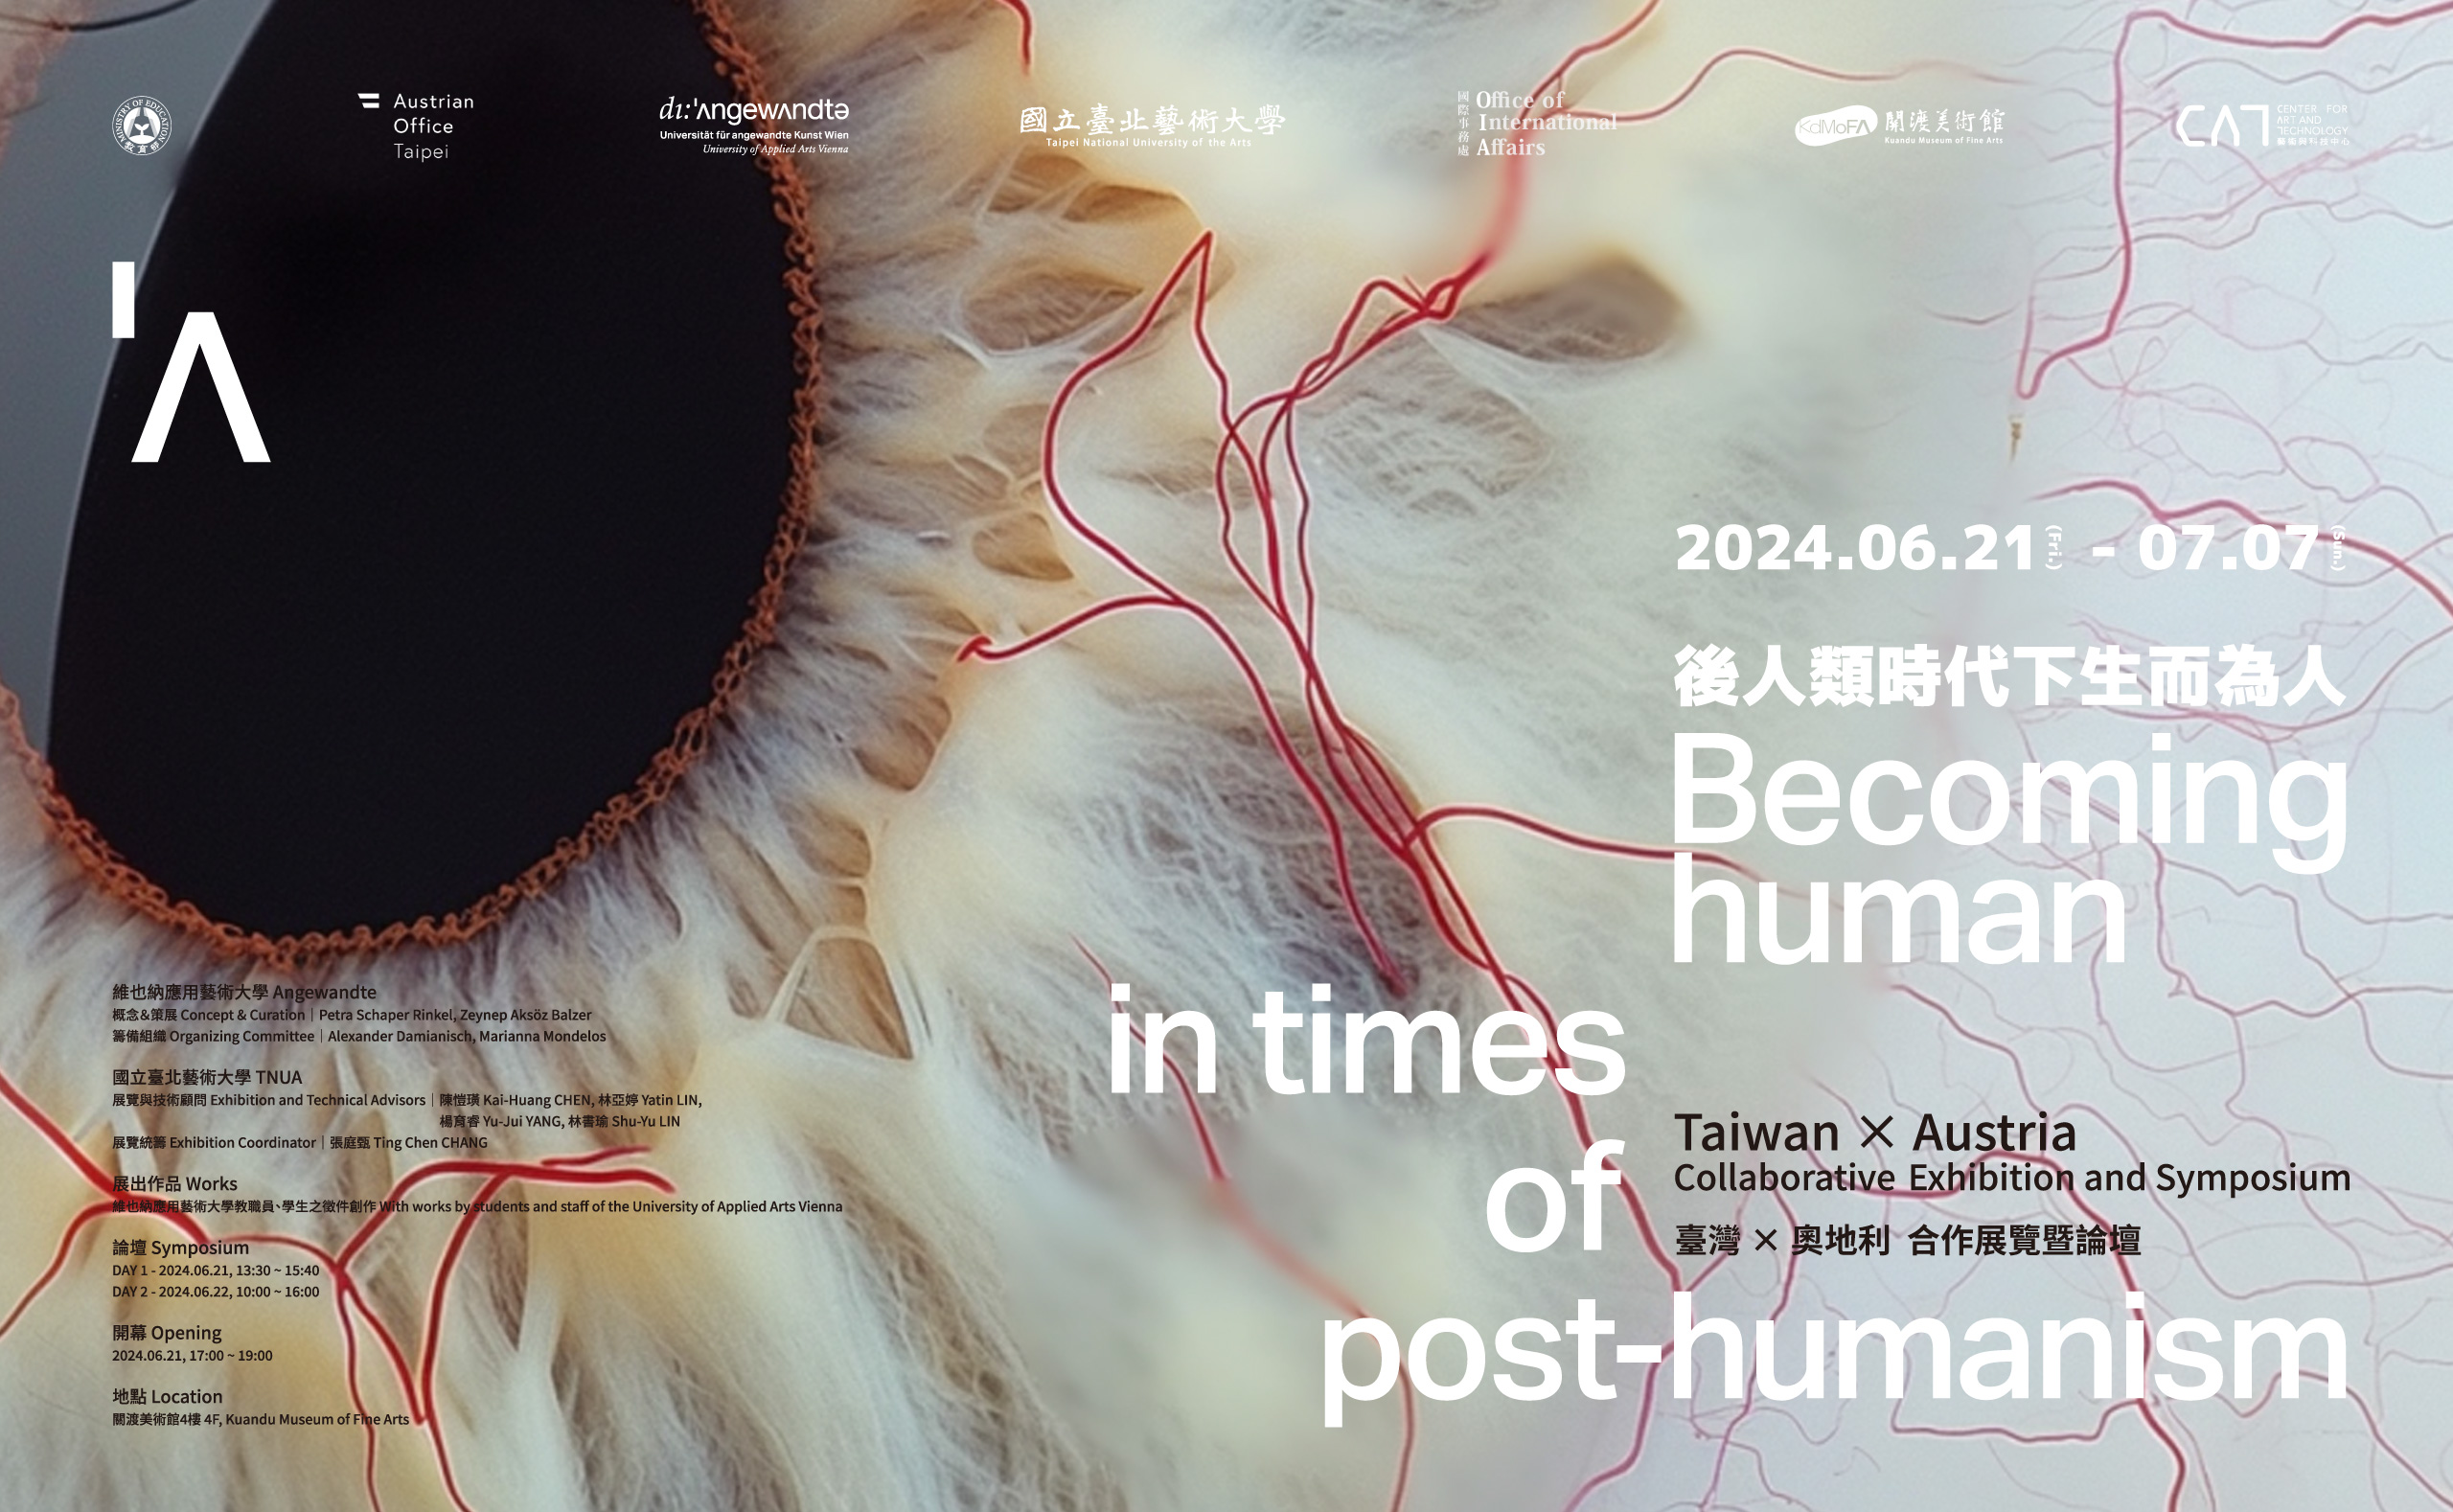 “BECOMING HUMAN IN TIMES OF POST-HUMANISM” Taiwan × Austria Collaborative Exhibition and Symposium